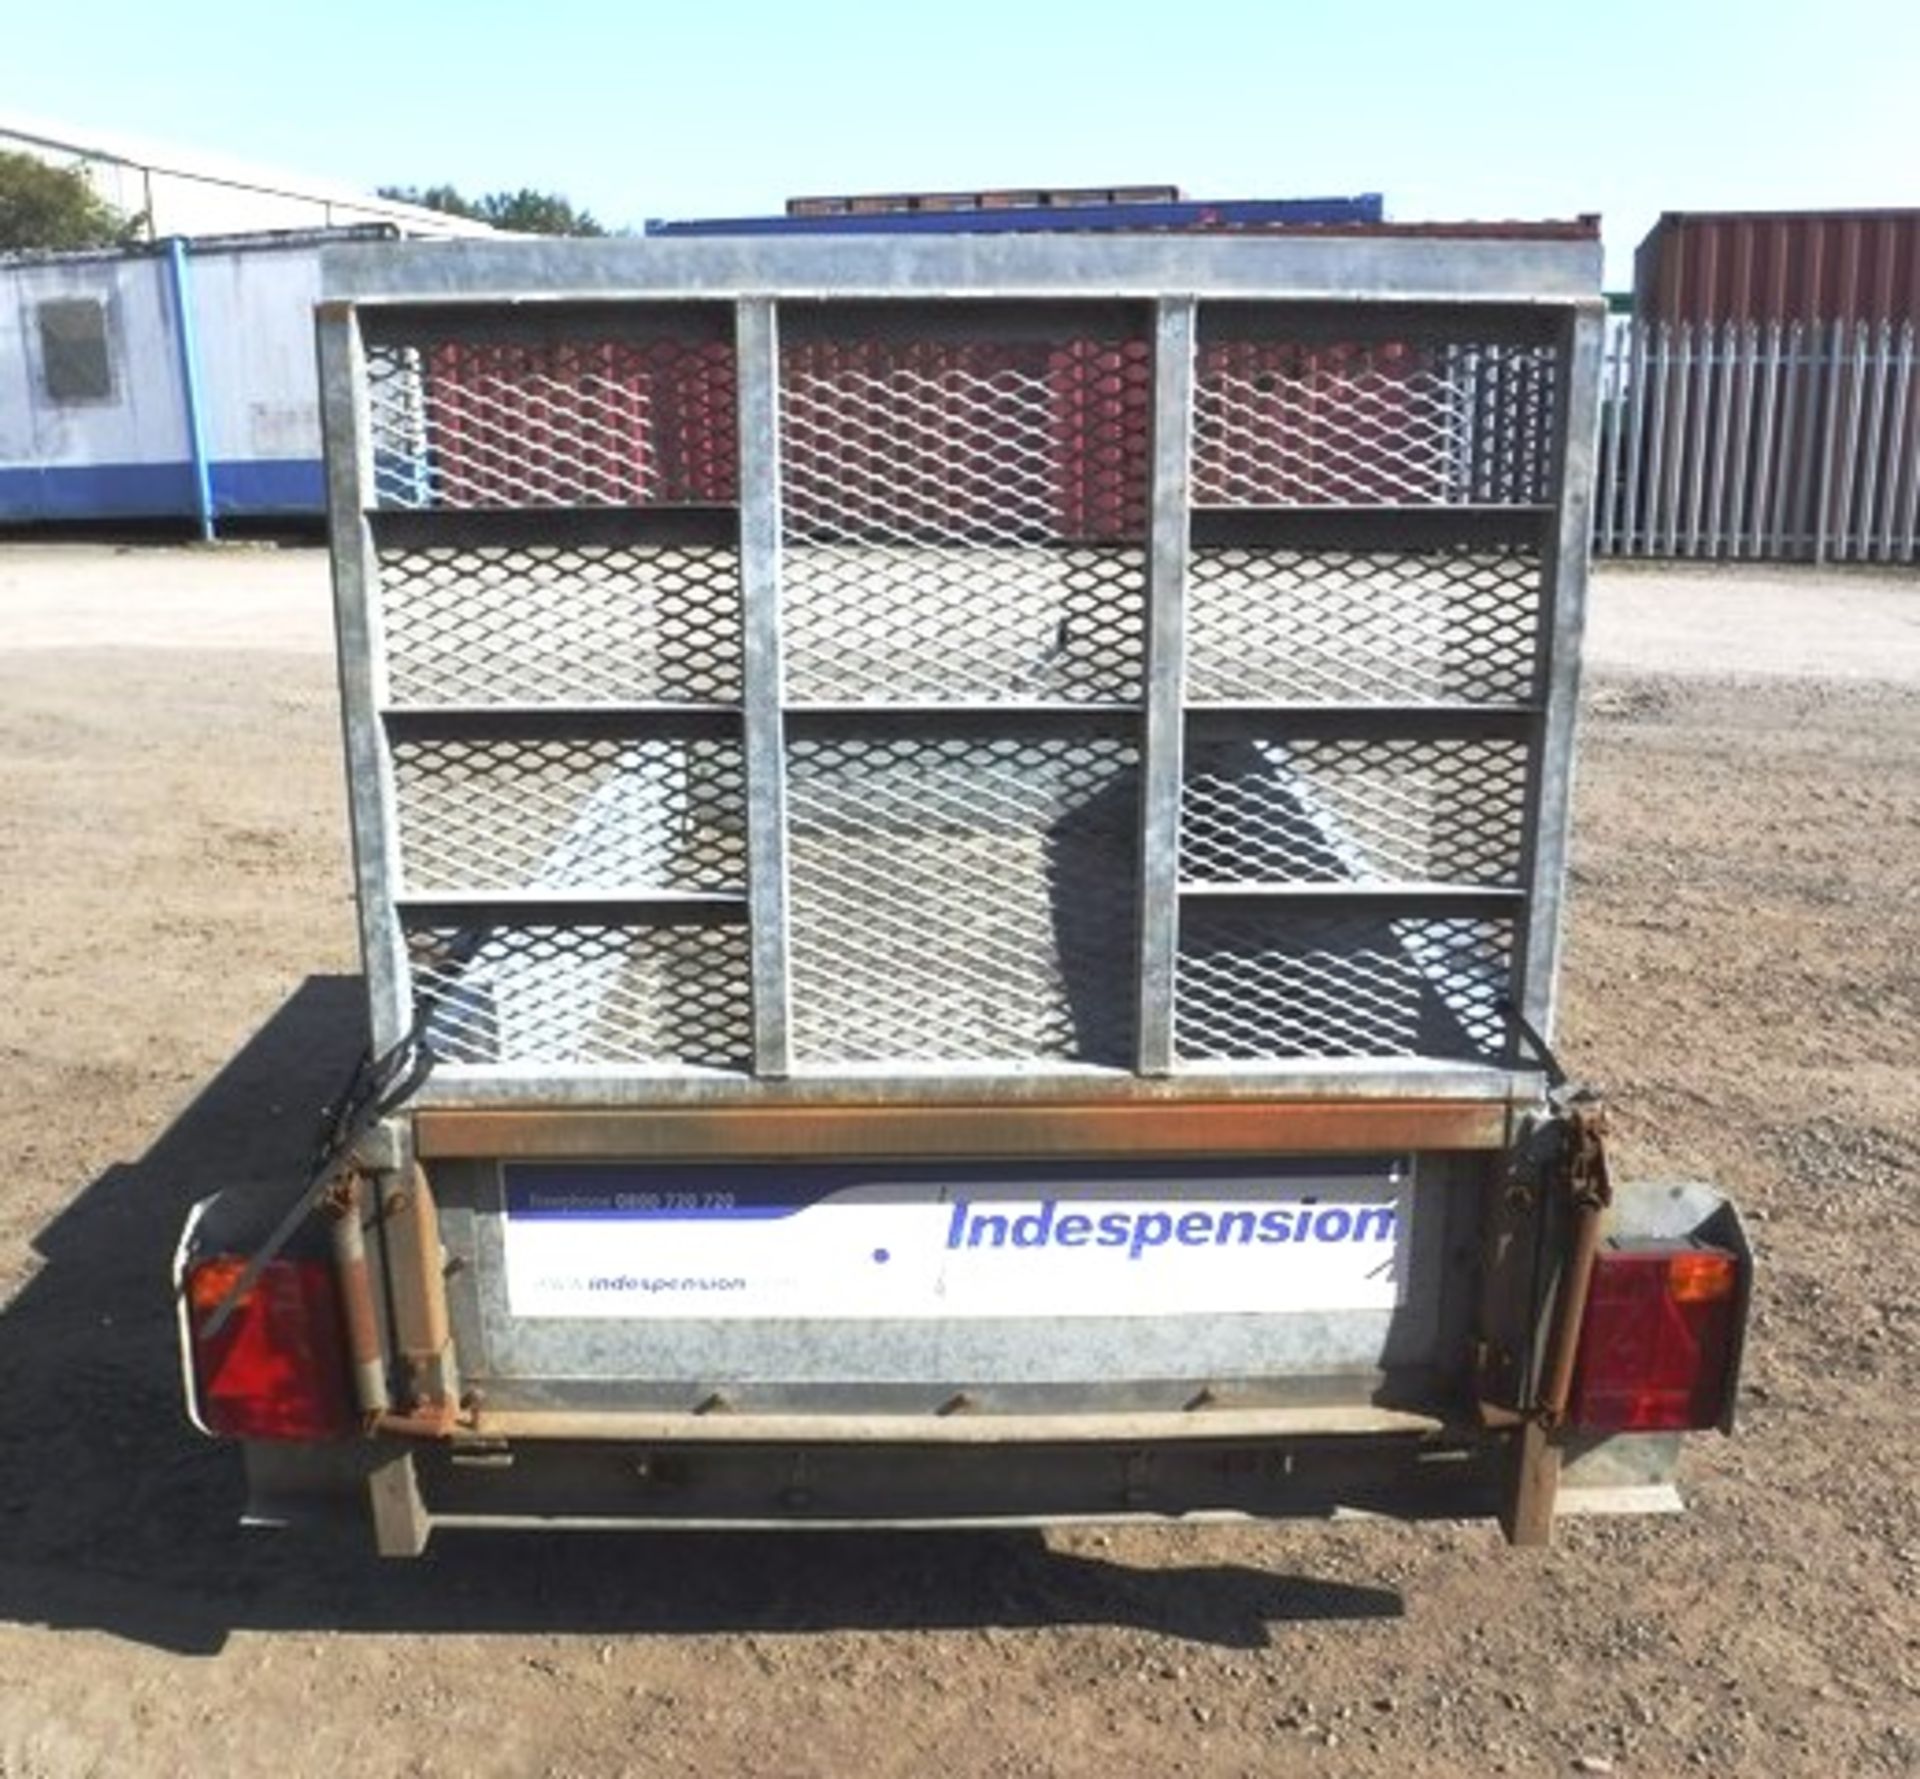 INDESPENSION single axle trailer. 8ft x 4ft with tail gate. Asset - 758-5132 - Image 10 of 13